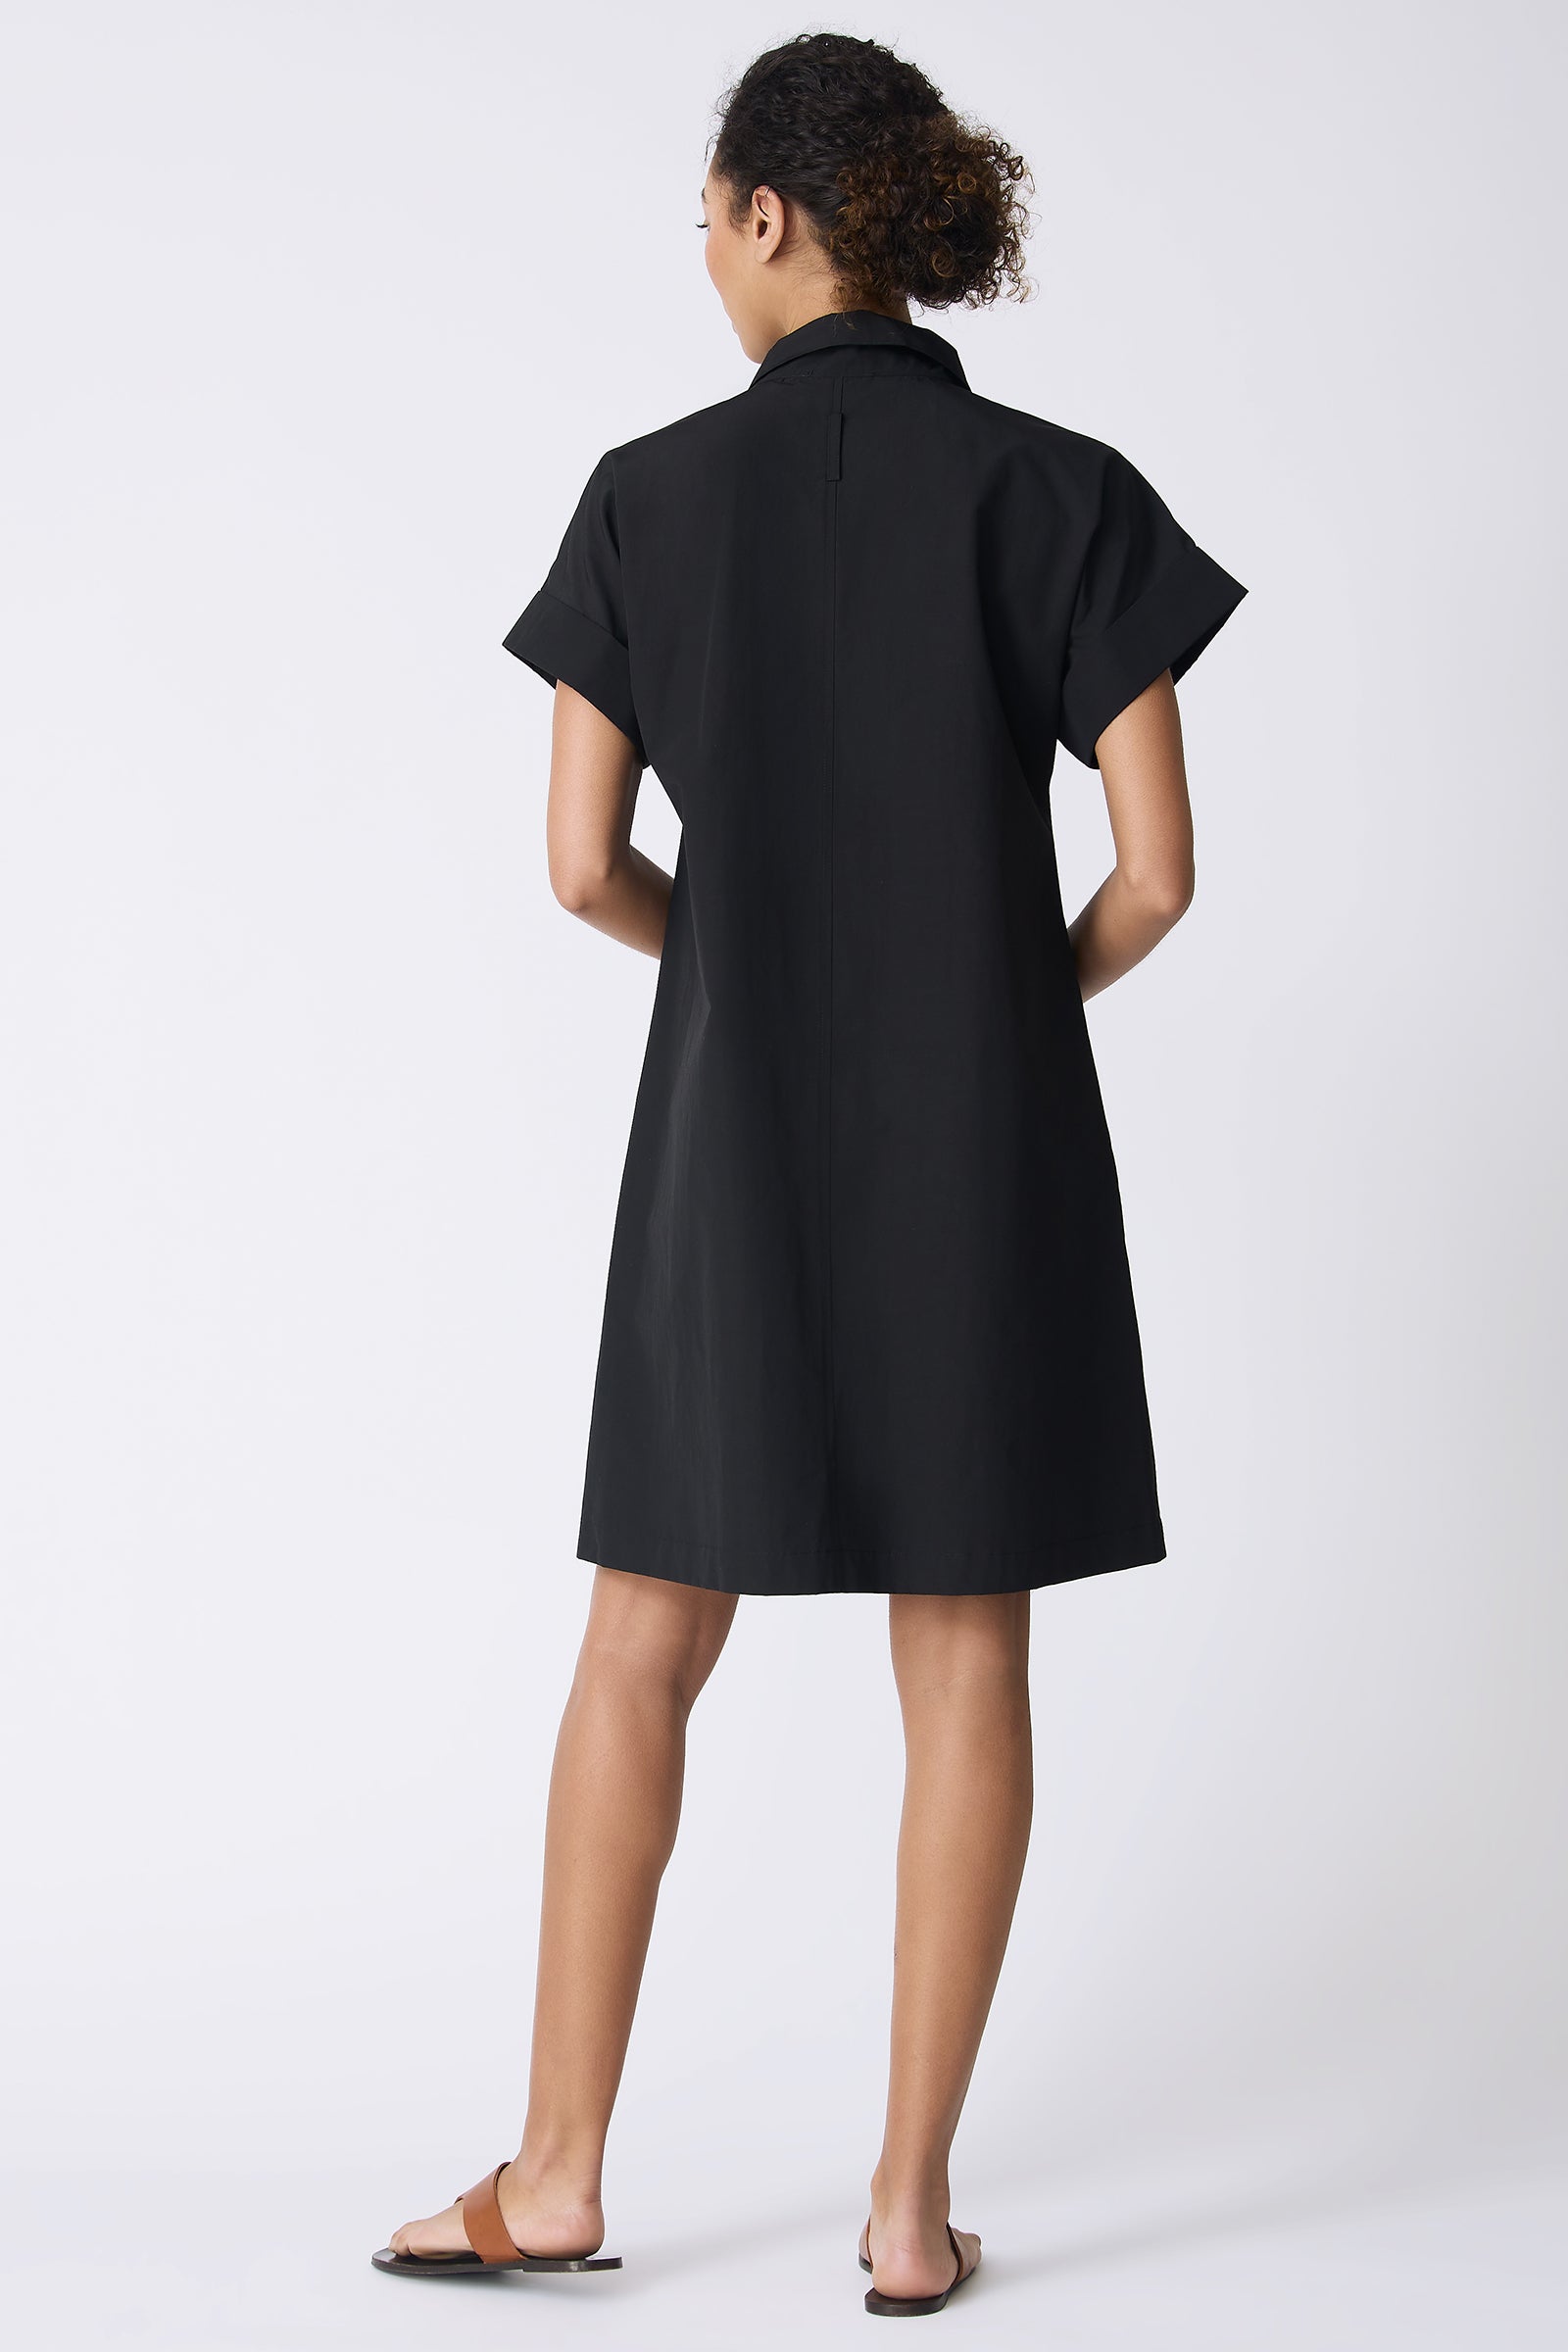 Kal Rieman Holly Kimono Dress in Black on model looking down front view